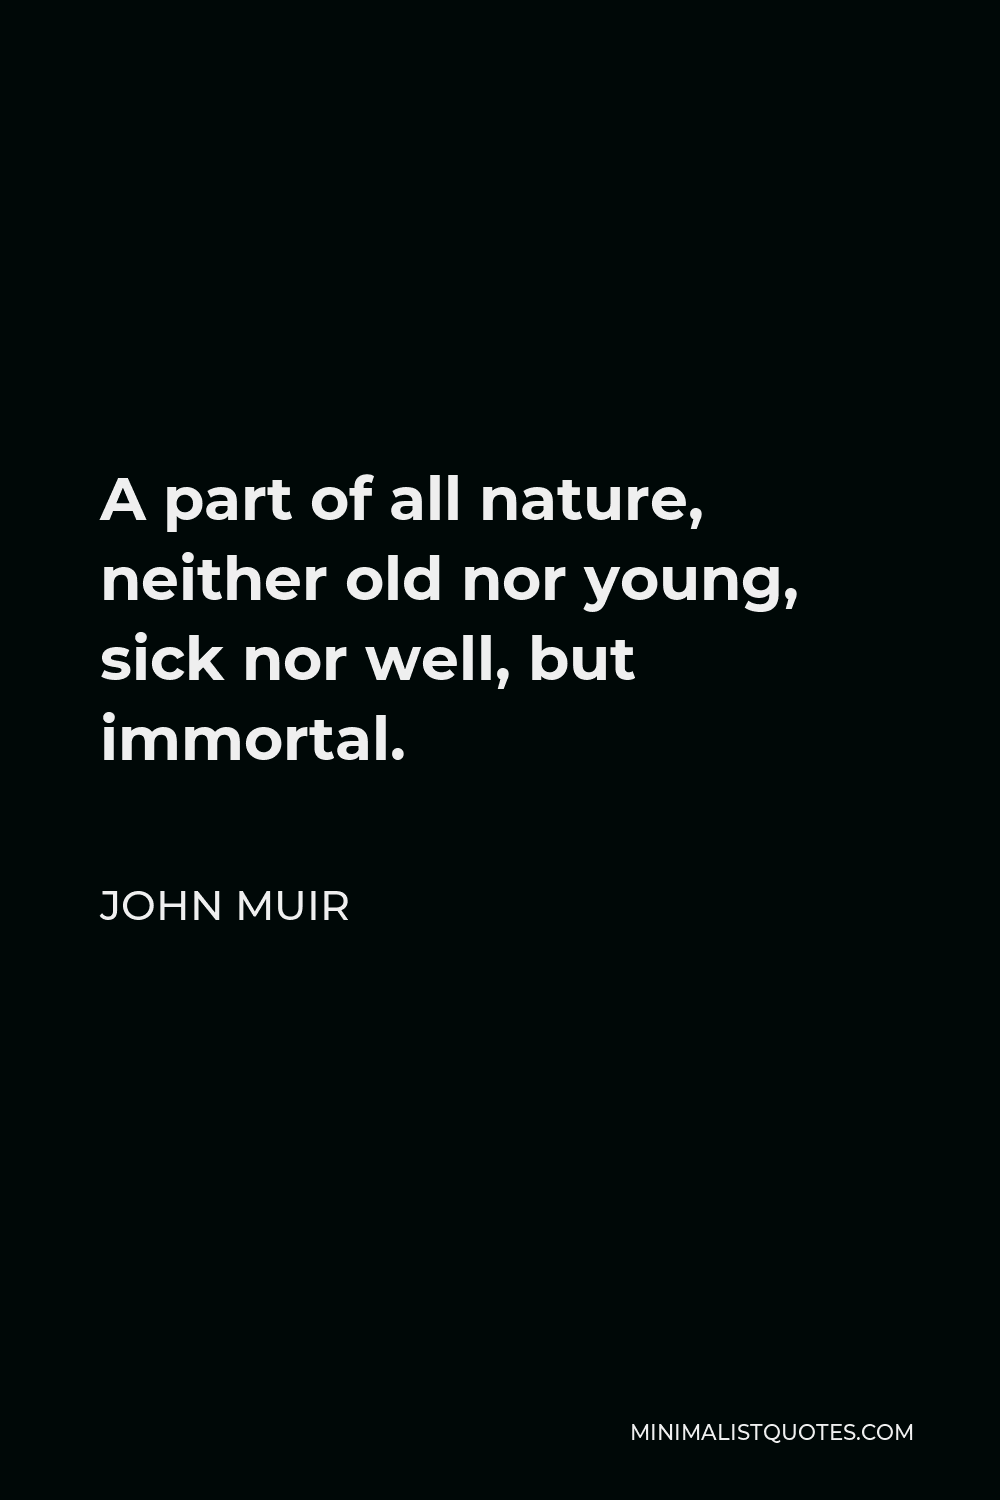 John Muir Quote - A part of all nature, neither old nor young, sick nor well, but immortal.